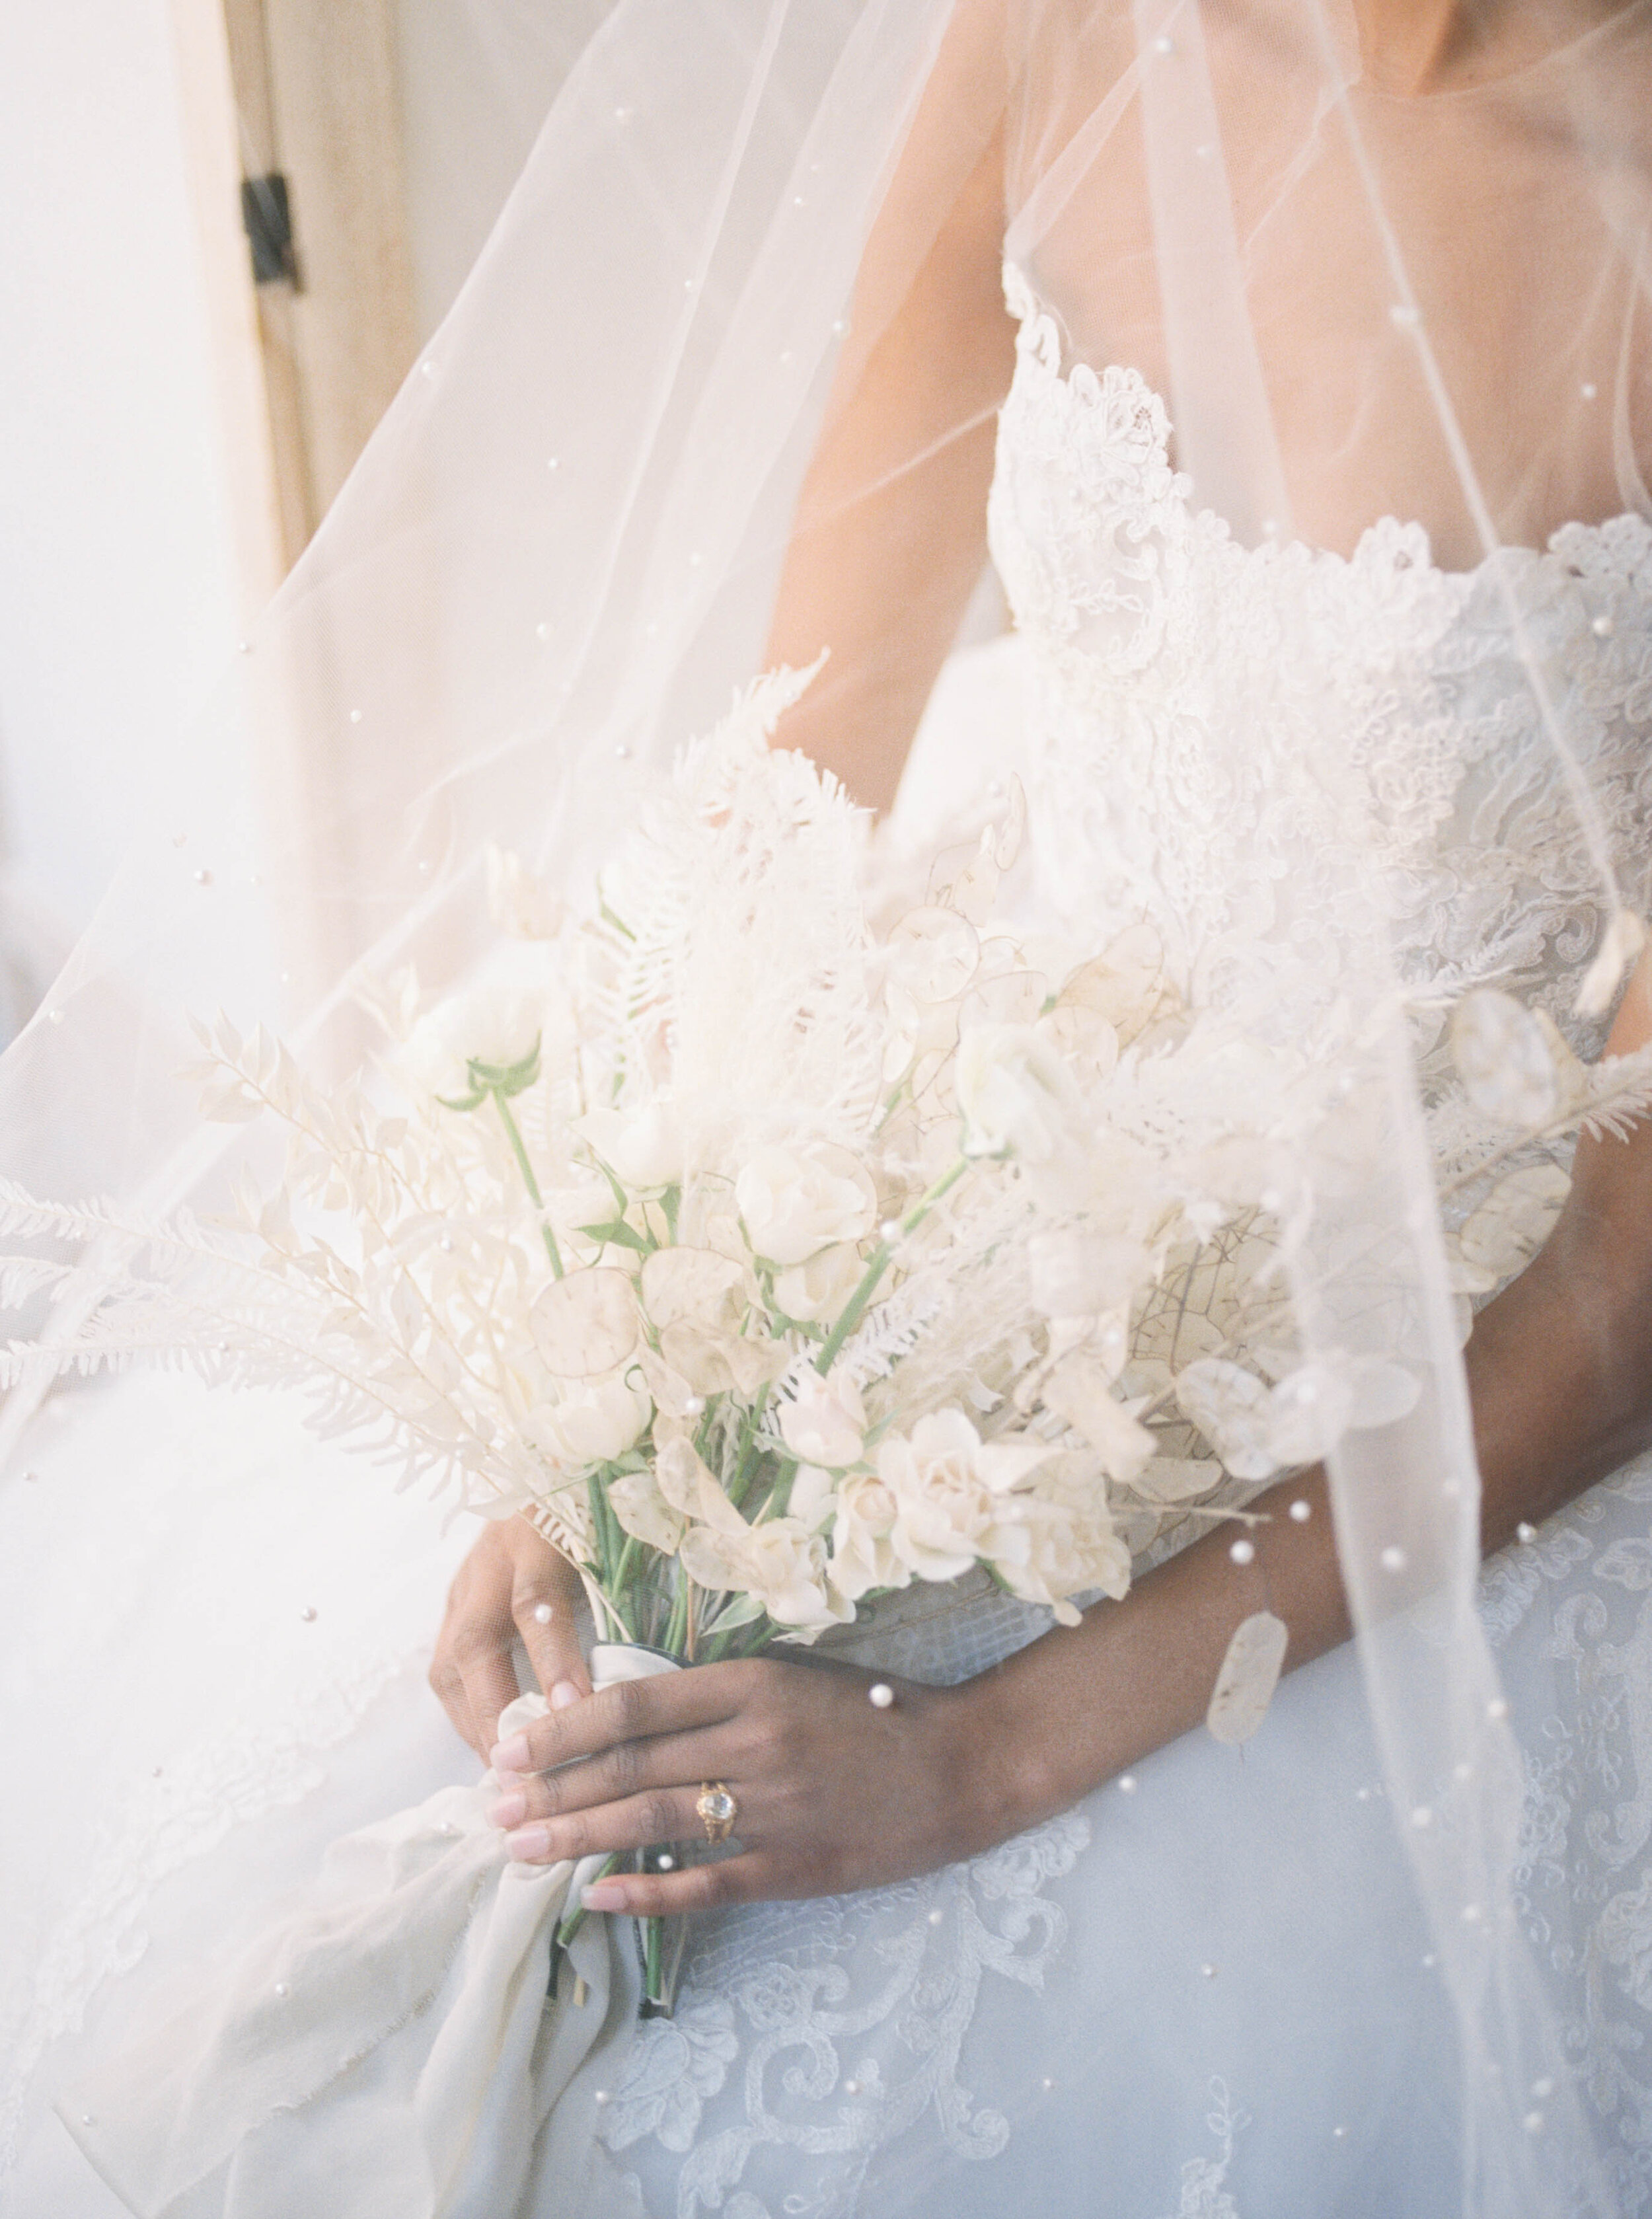 New York City Bridal Editorial featuring Reem Acra wedding gown and monochrome white bouquet by Liz Andolina